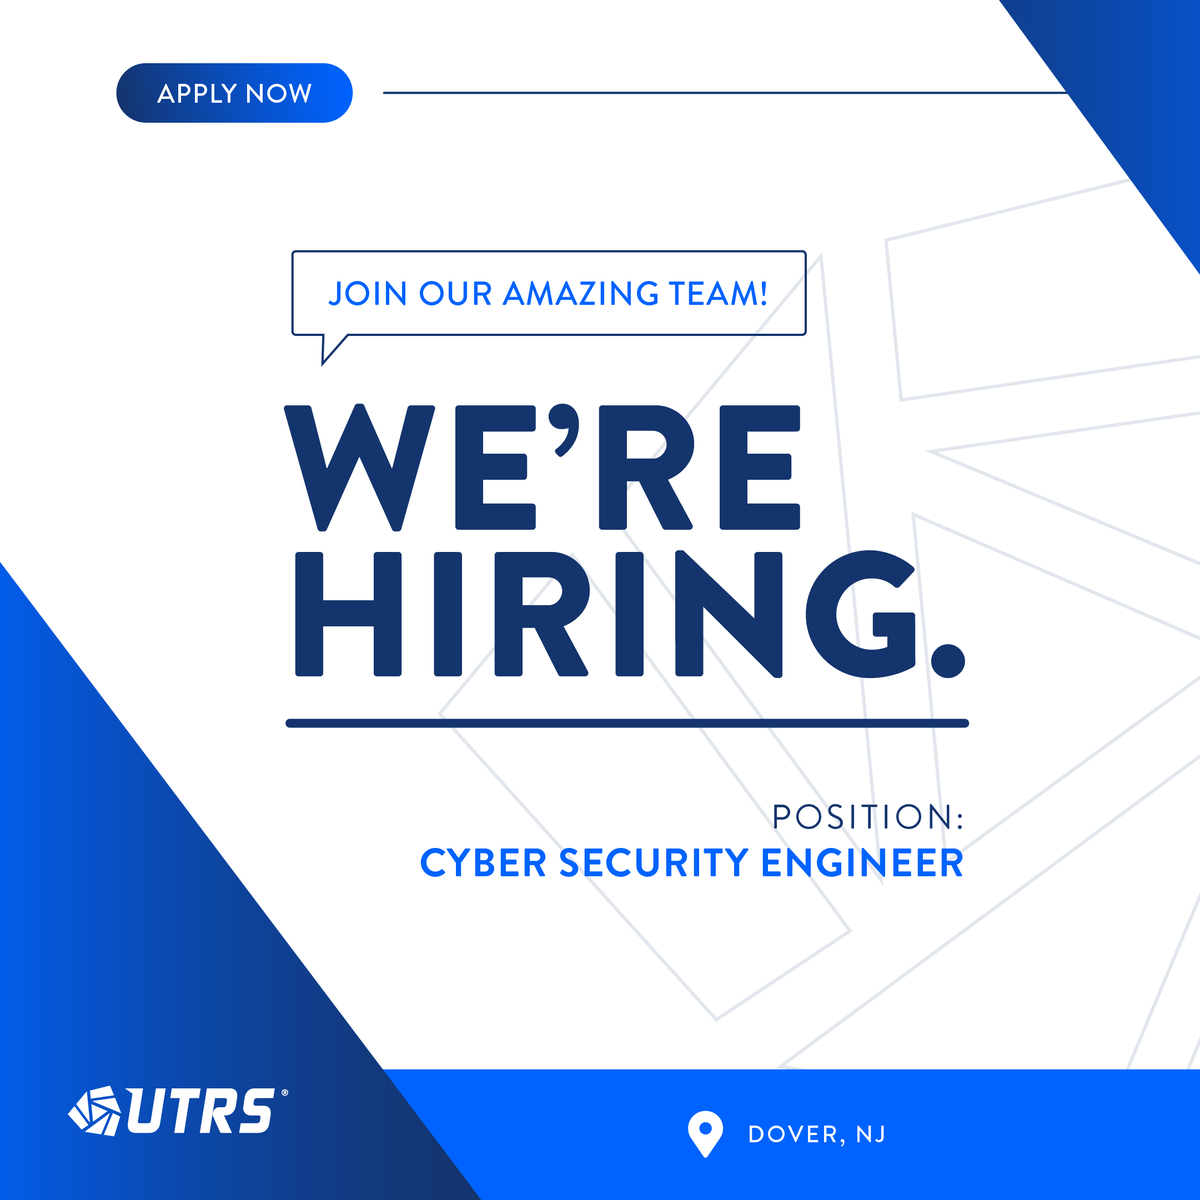 Are you a Cyber Security Engineer interested in working for a forward-thinking company? Are you ready to take on new challenges? Then we want you on the UTRS Team! Check out our job opening and apply today: bit.ly/3ZQWhqB #jobsearch #NJjobs #UTRS #cybersecurity #engineer